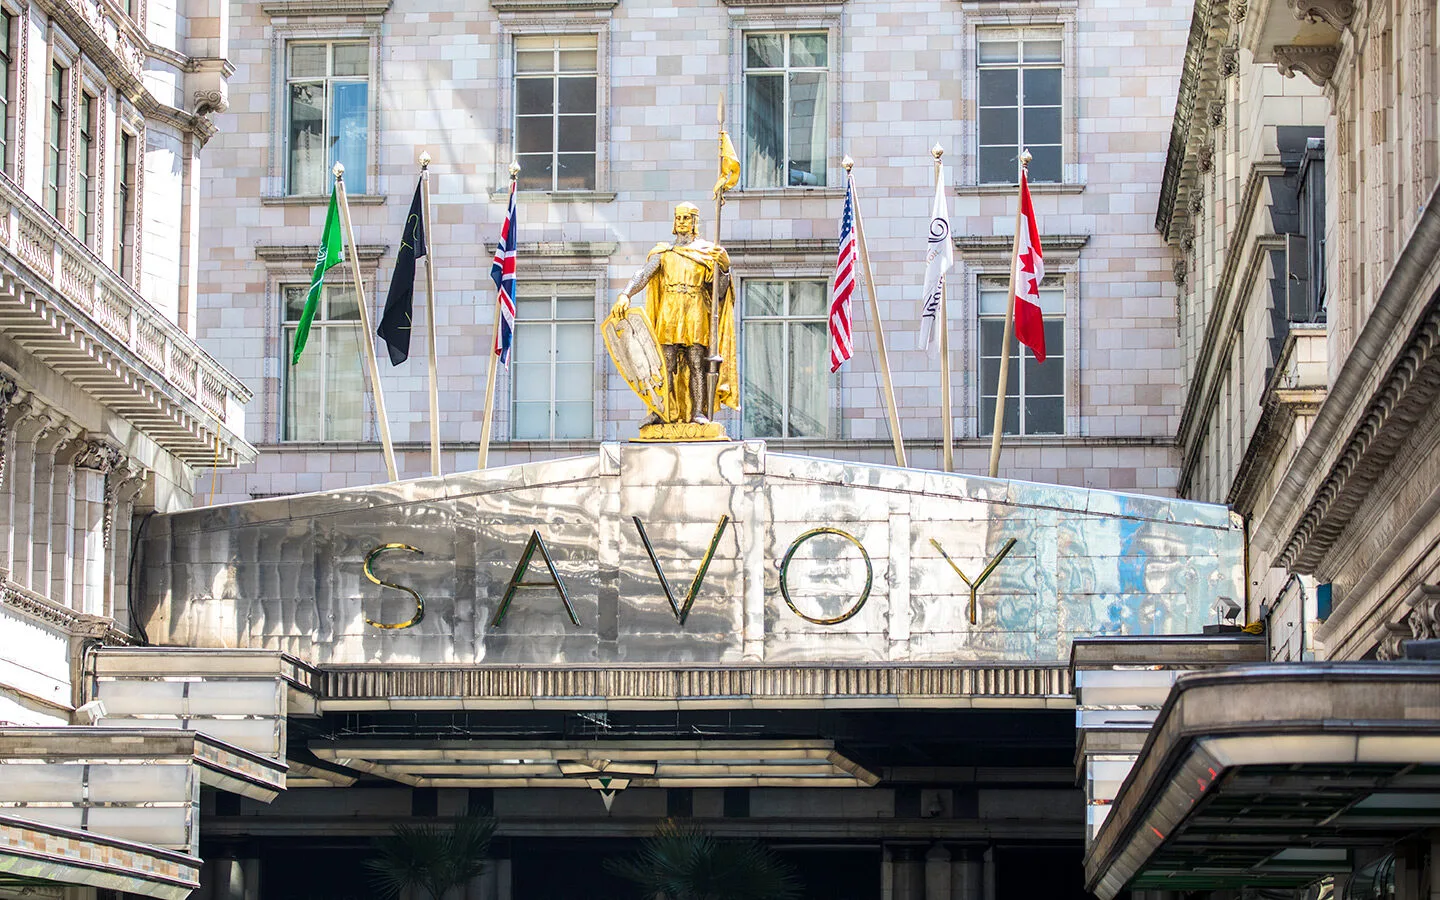 The entrance to the Savoy hotel in London